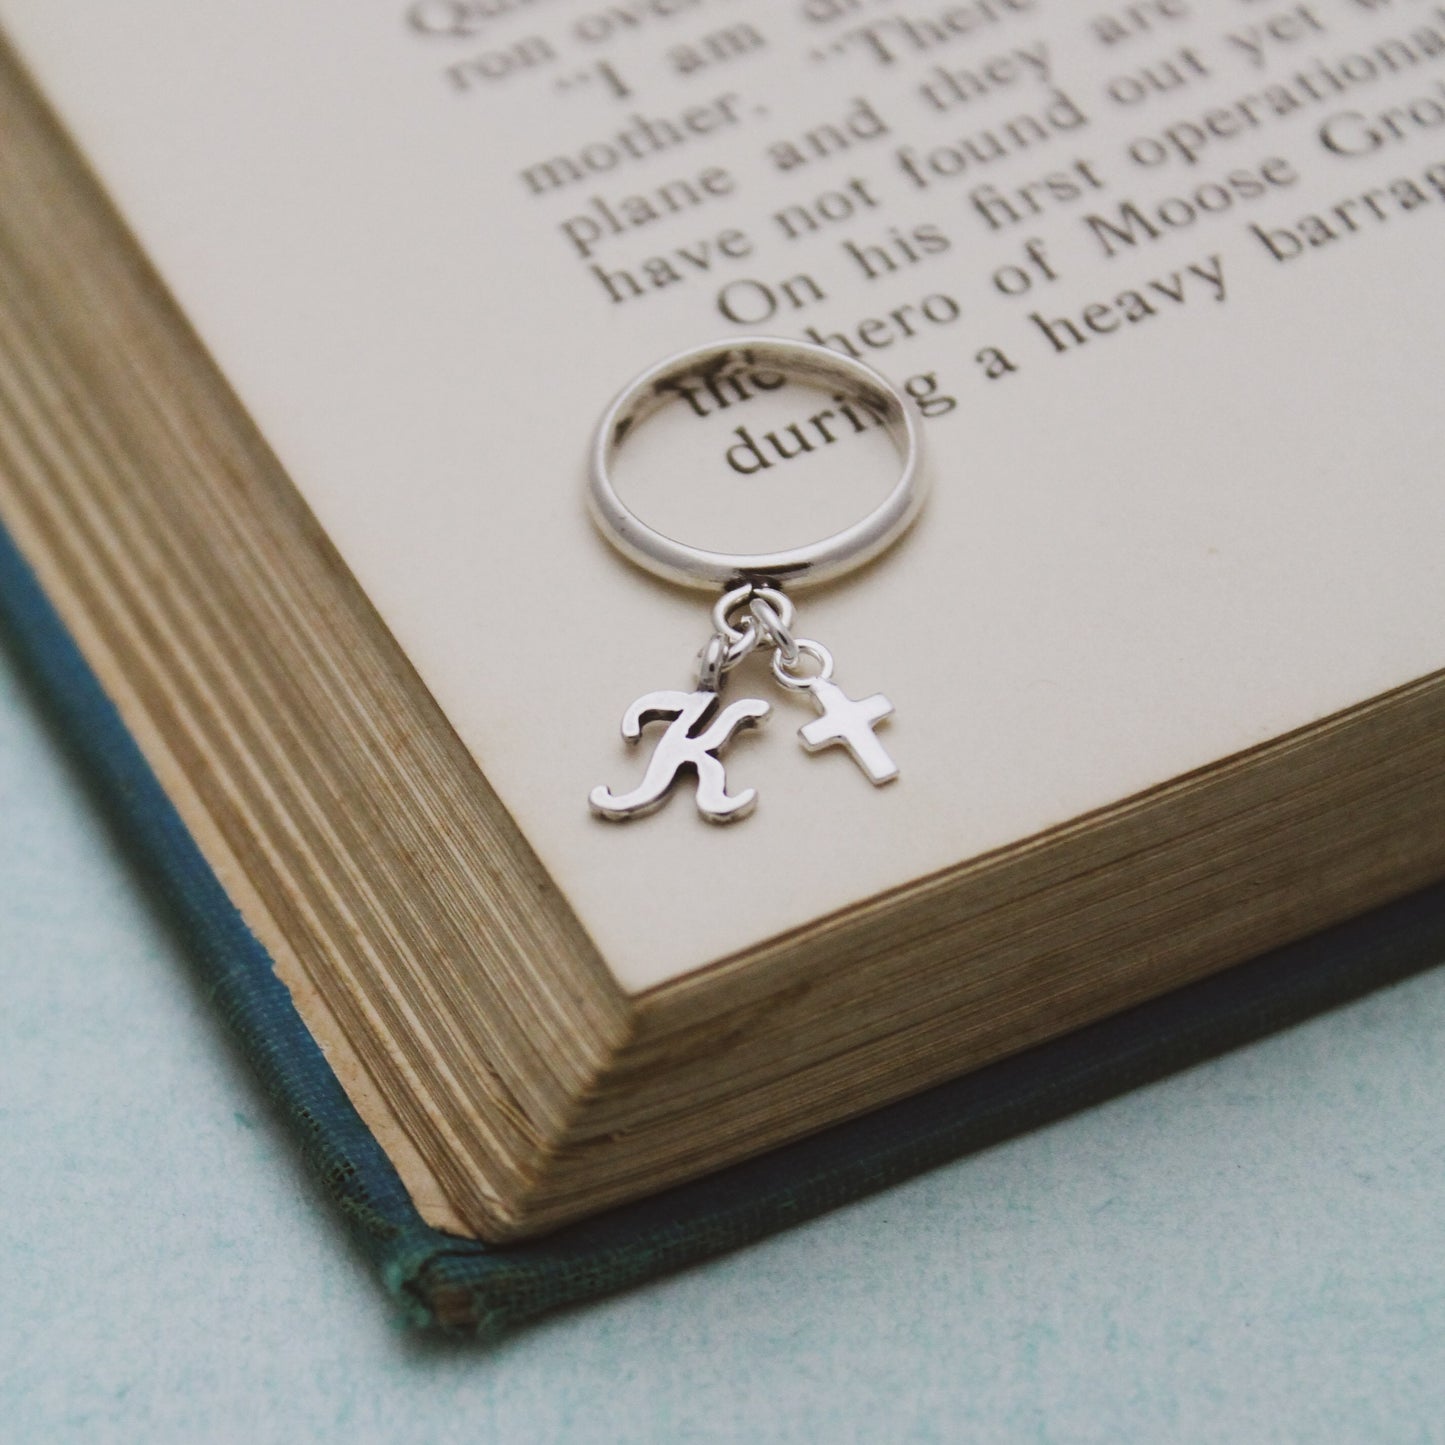 Cross & Initial Charm Ring, Sterling Silver Initial Ring, Dangle Ring, Personalized Jewelry, Initial Jewelry, Faith Charm Ring, Gift for Her